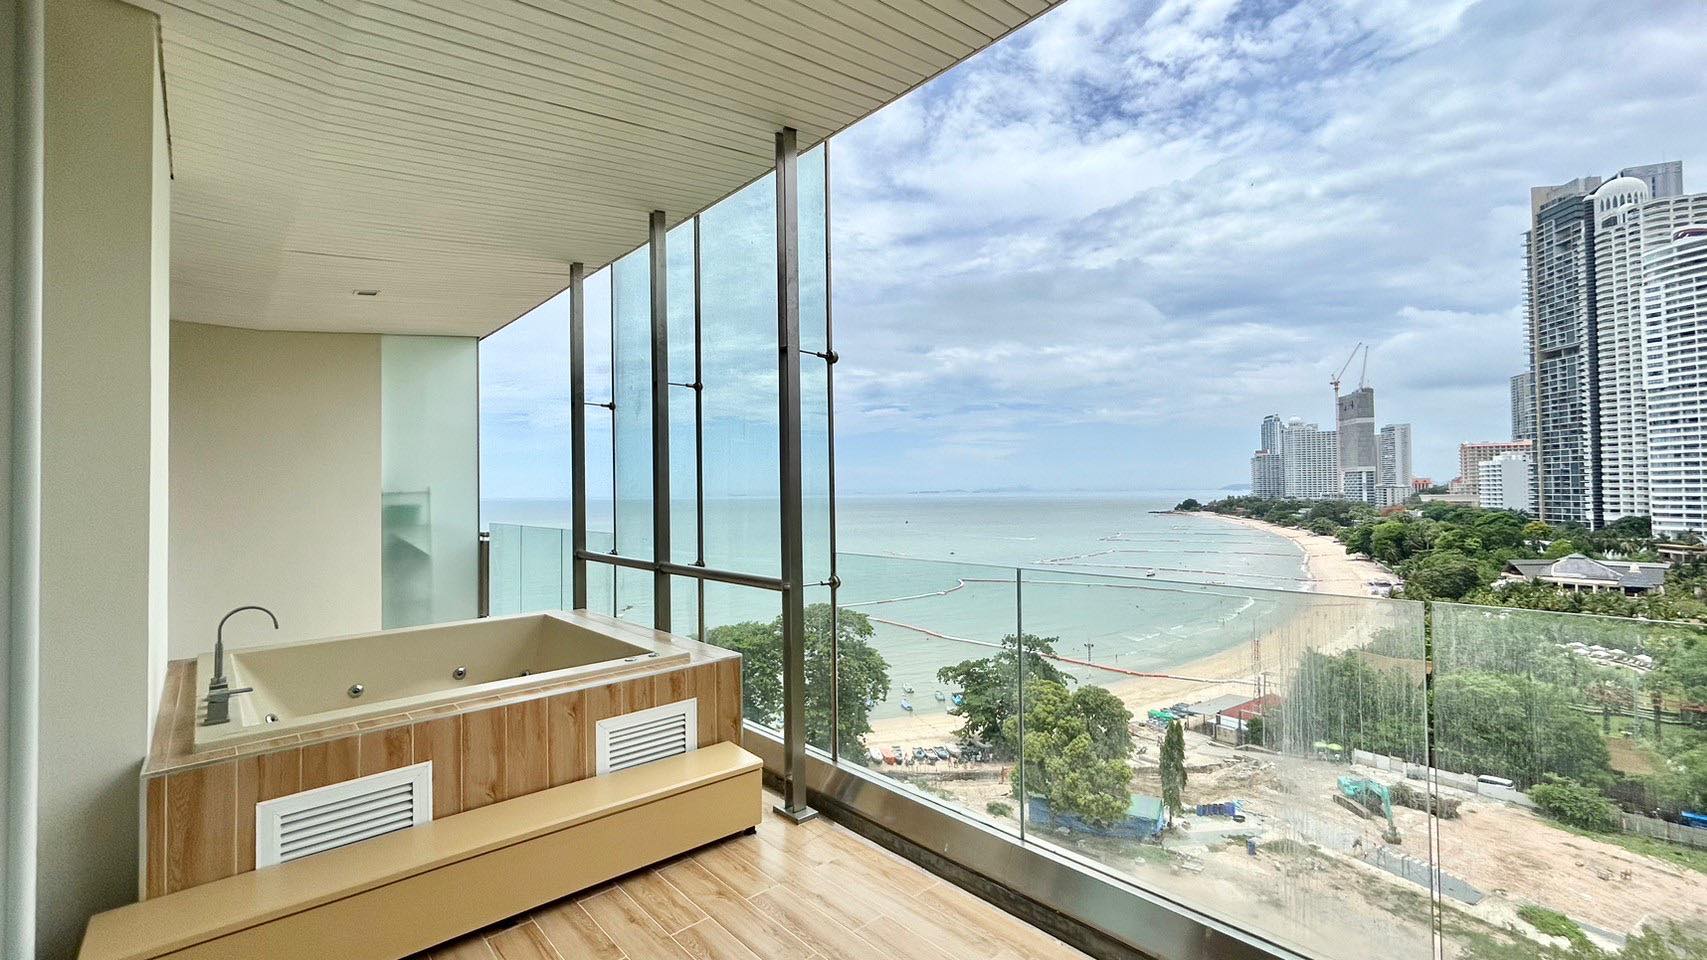 The Cove. Spacious 1 bedroom with two terraces. Sea view